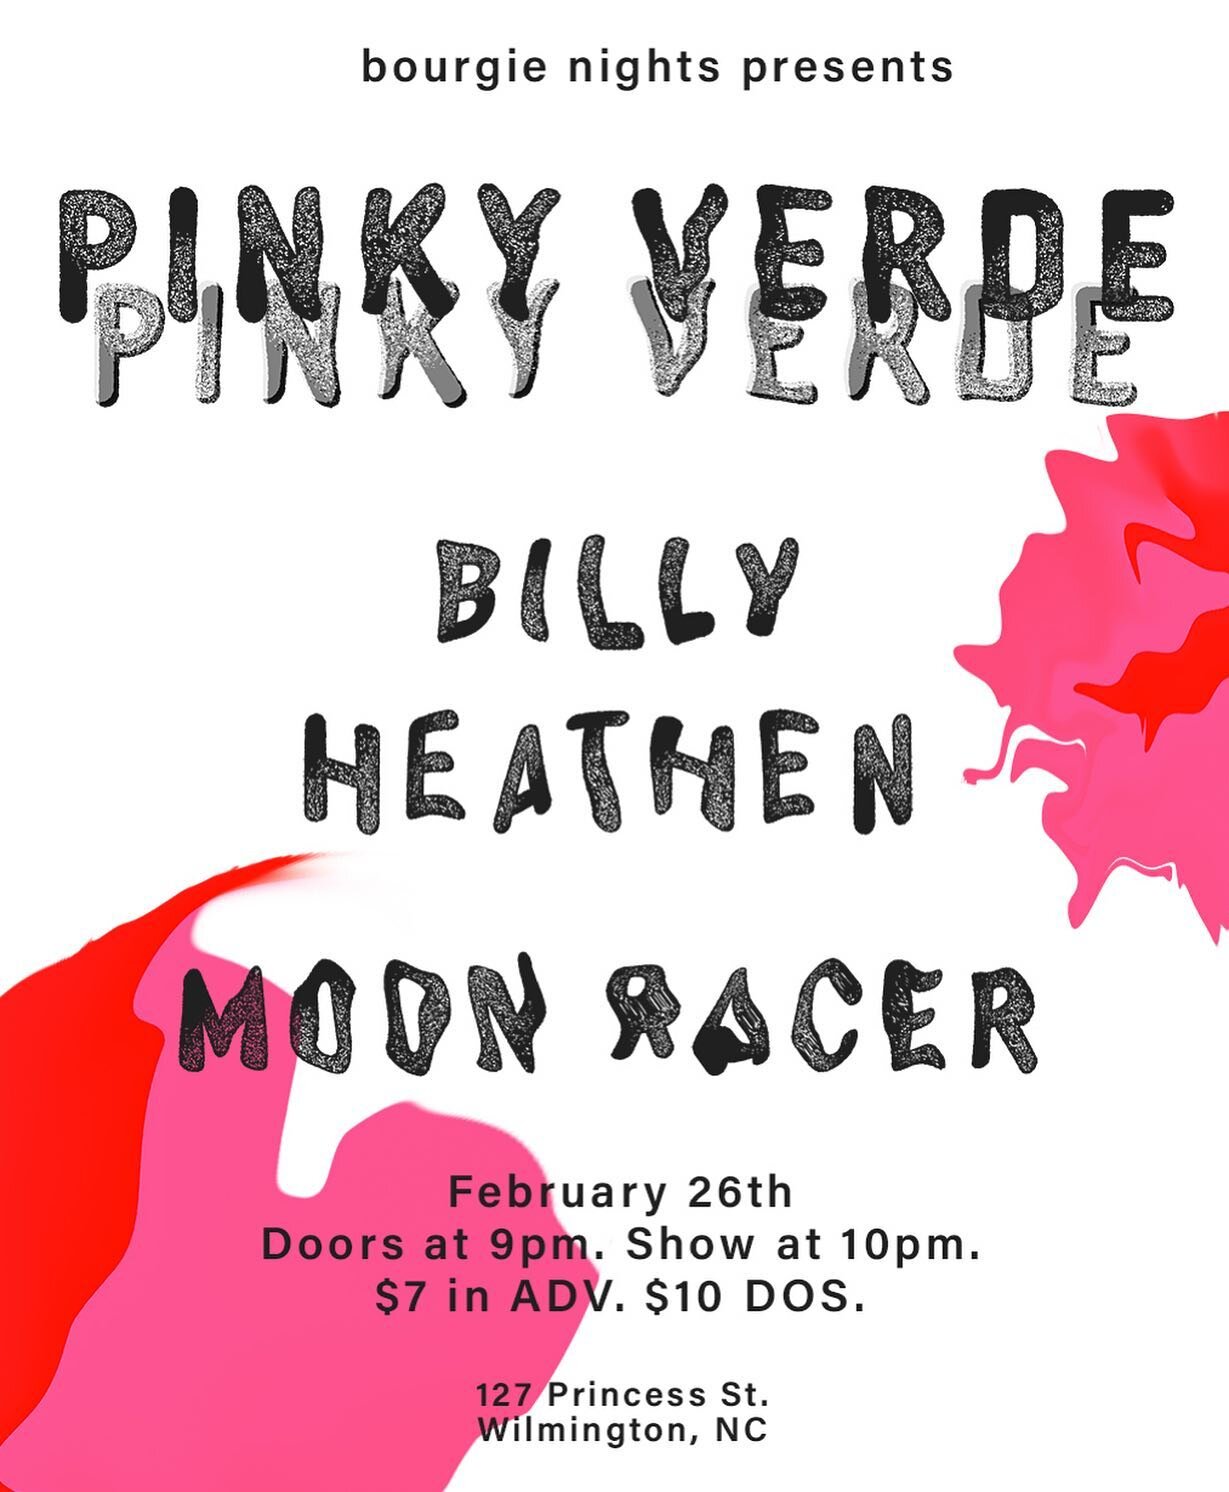 ❤️so excited to play this dreamy show in Wilmington next weekend 🌴with @pinky_verde and @billyheathen 💖 @bourgienights 💅first NC show in 2 years 🥲